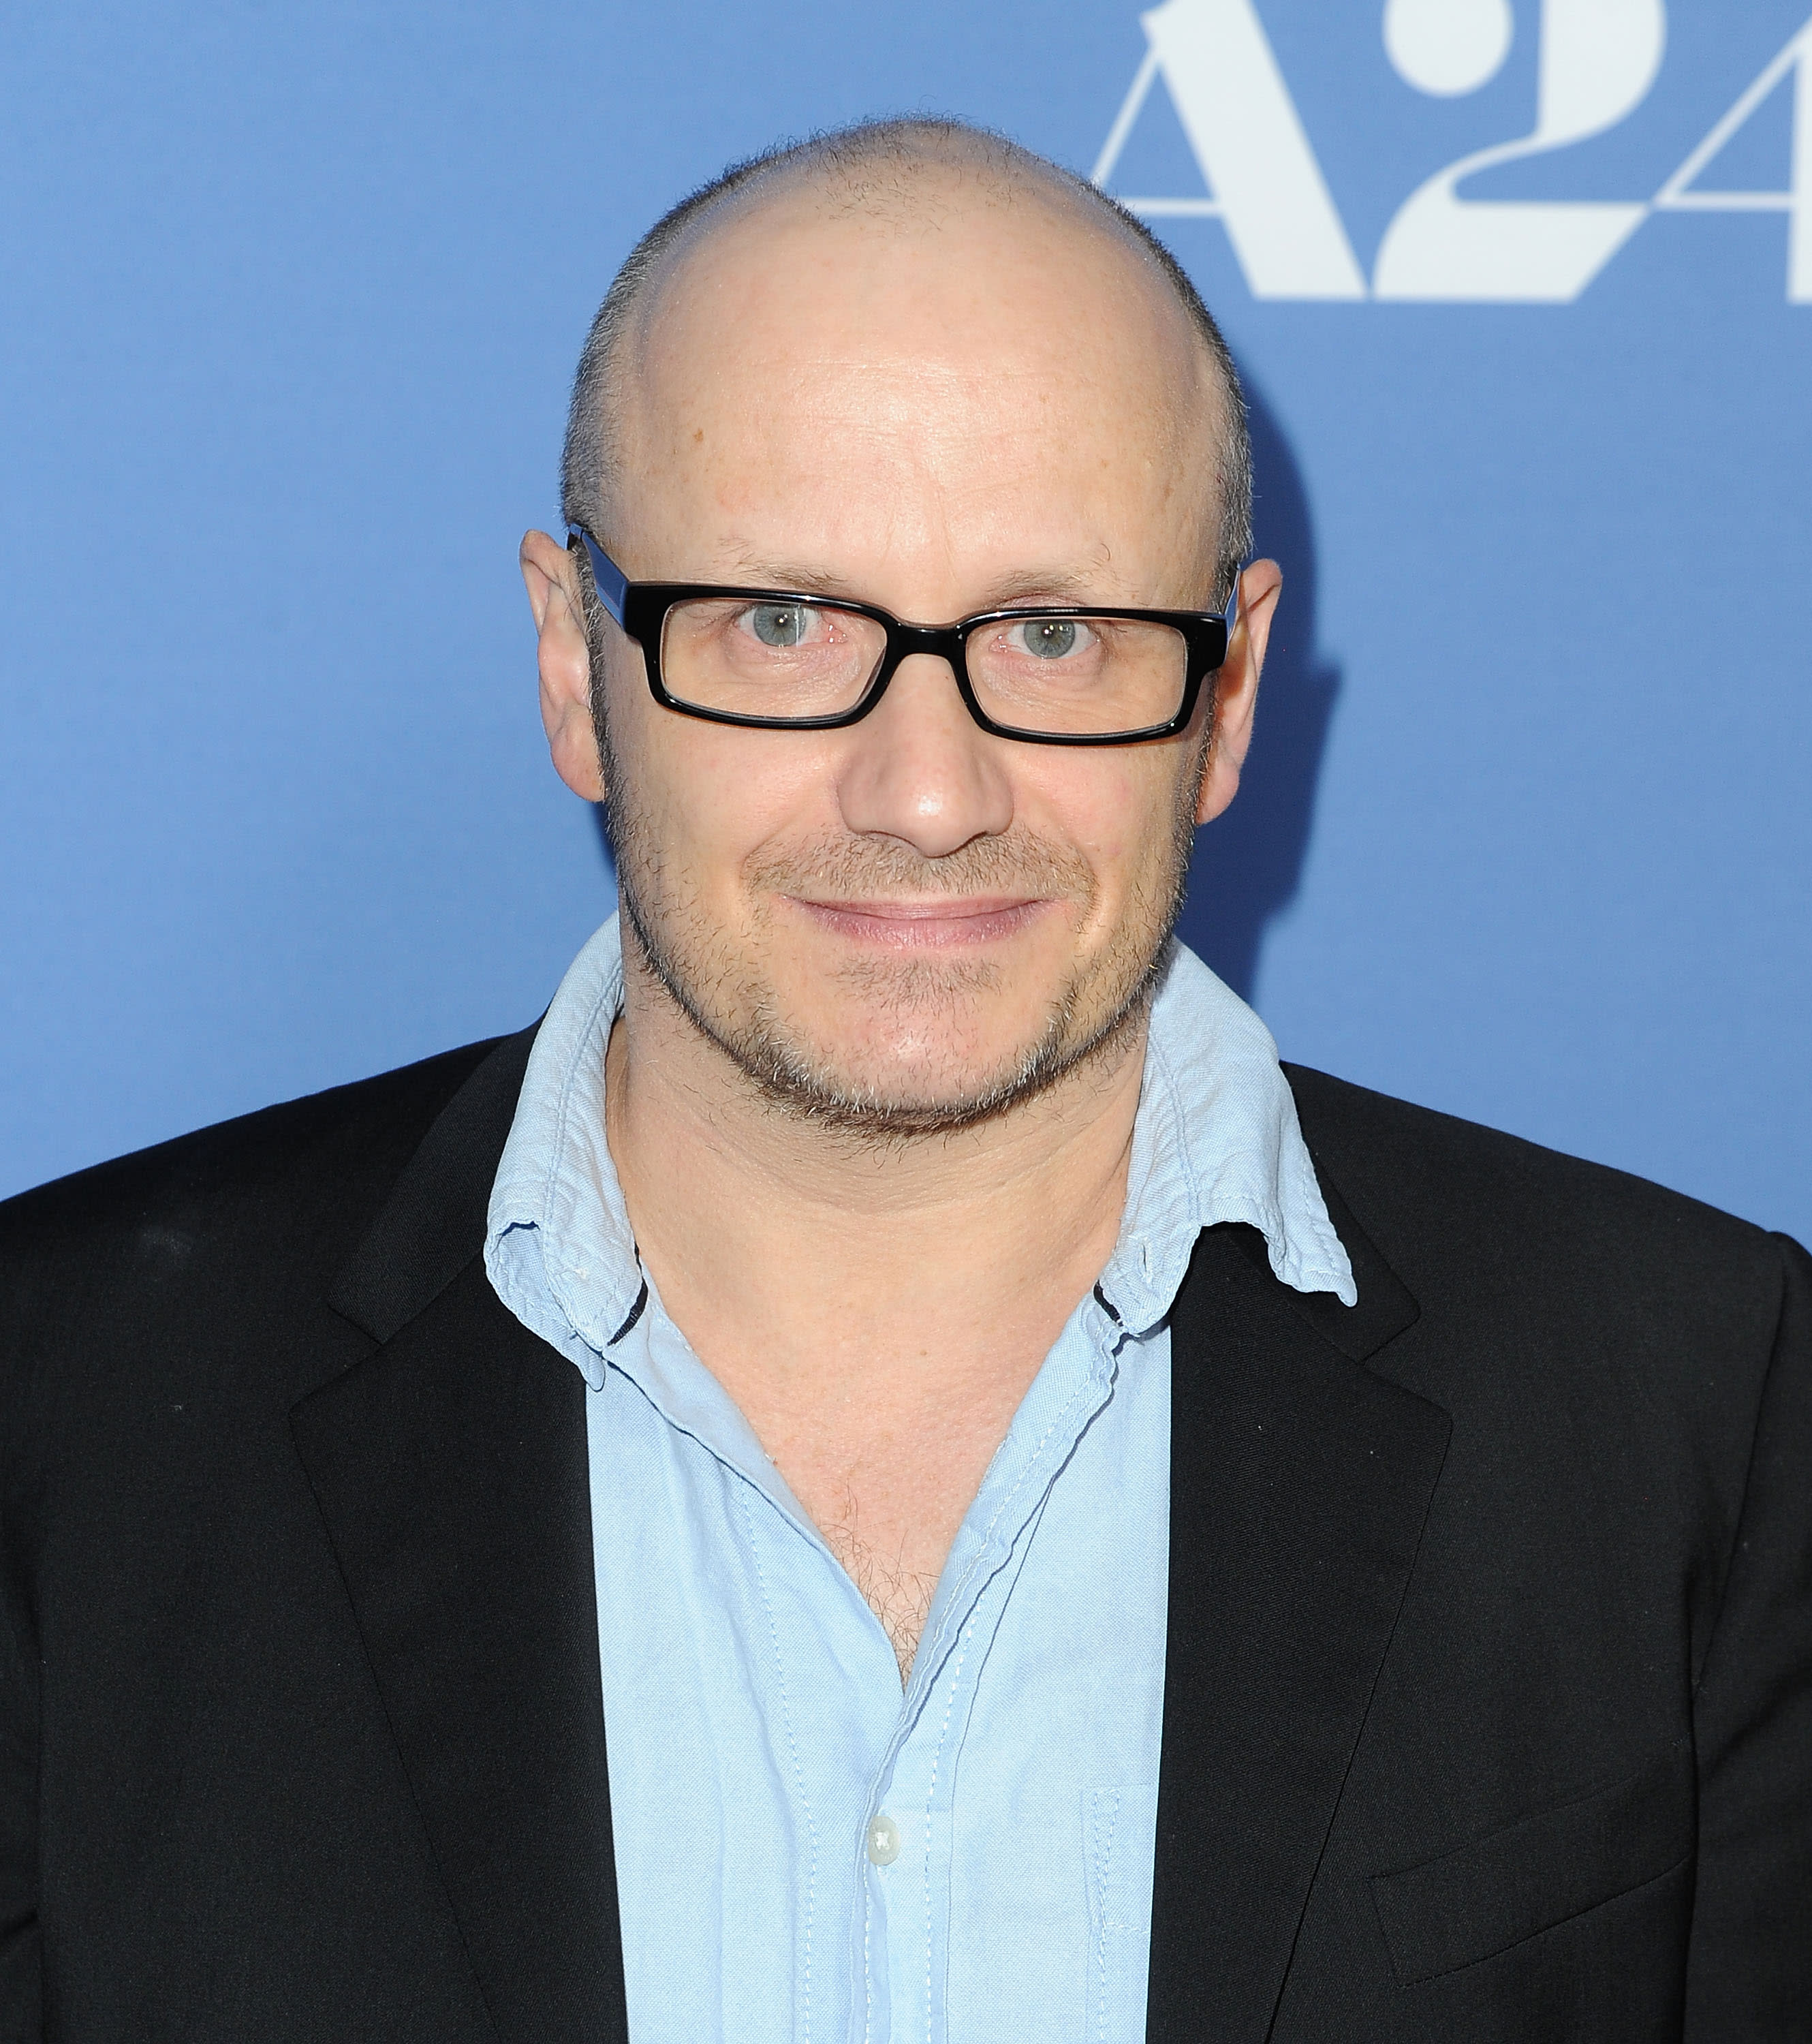 Room Director Lenny Abrahamson Will Bring A True Story To